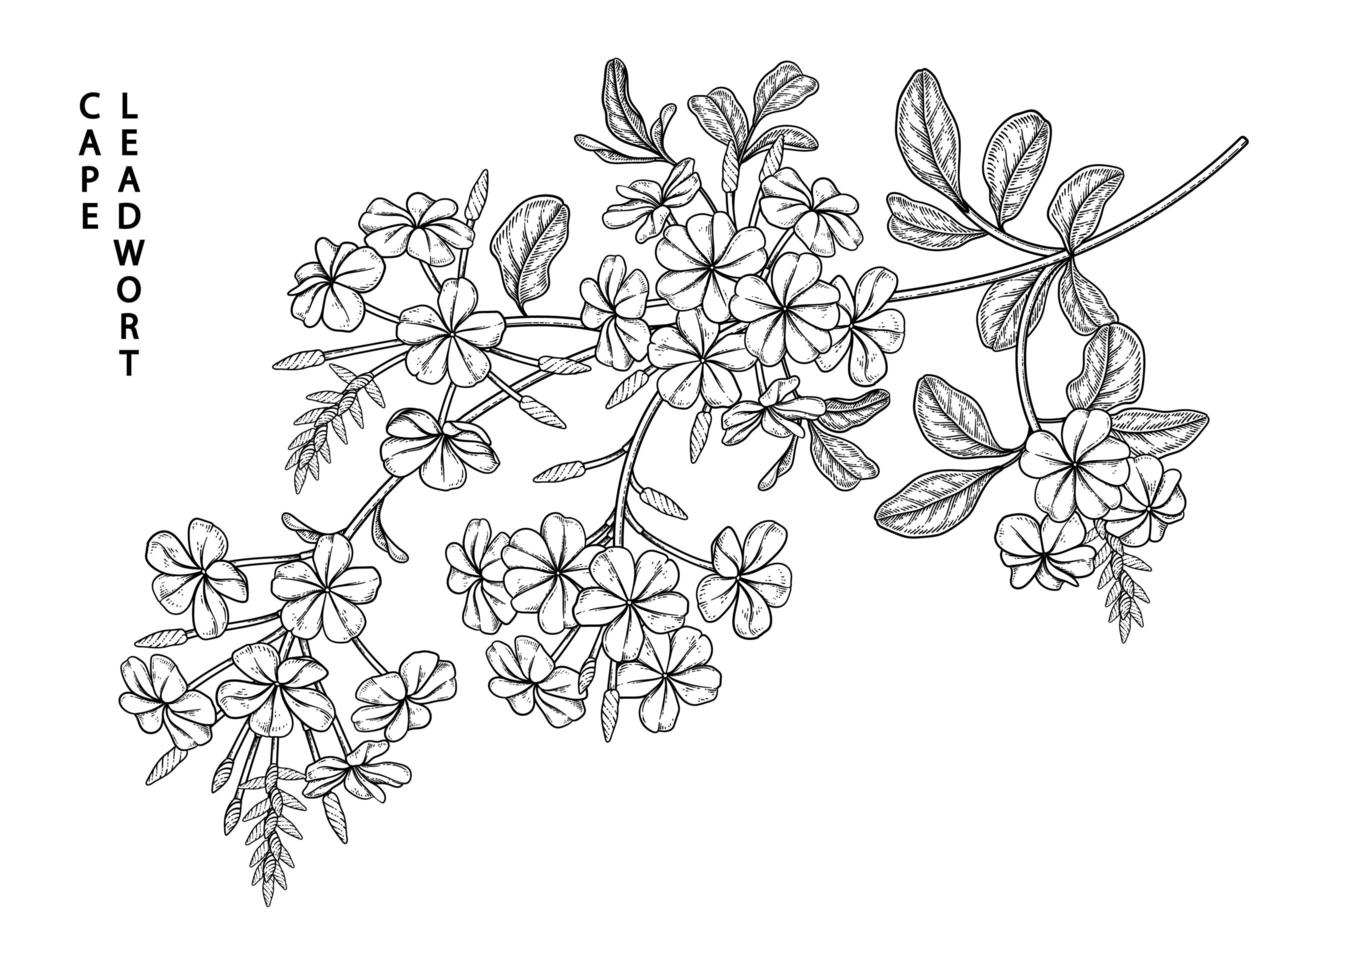 Branch of Plumbago auriculata or Cape Leadwort with flowers and leaves Hand Drawn Sketch Botanical Illustrations vector